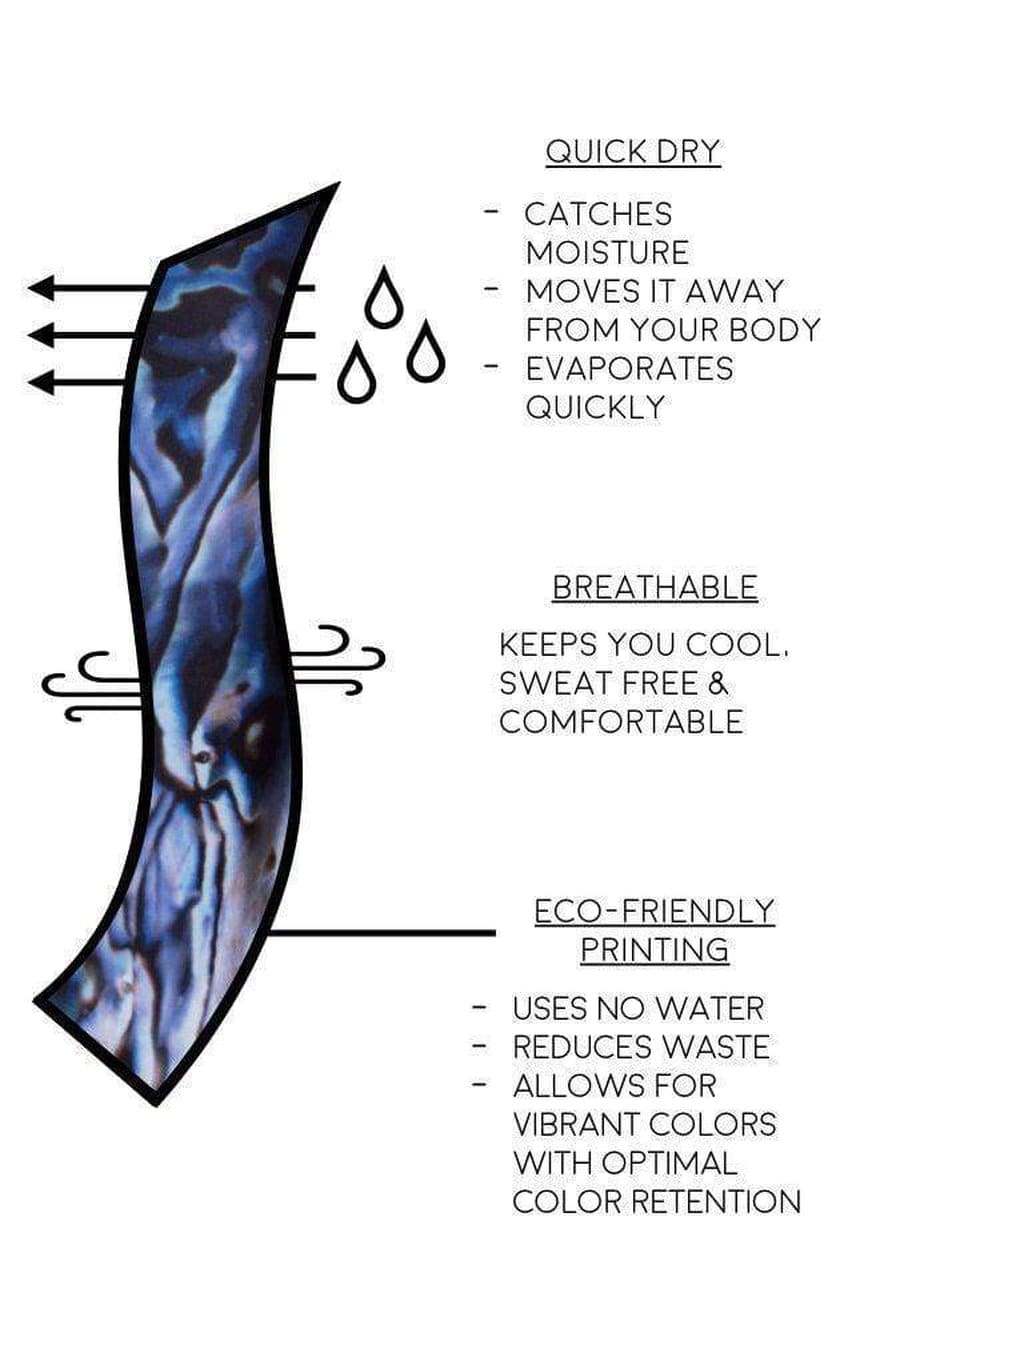 Waterlust Abalone Restoration Leggings fabric details showing moisture wicking and quick dry